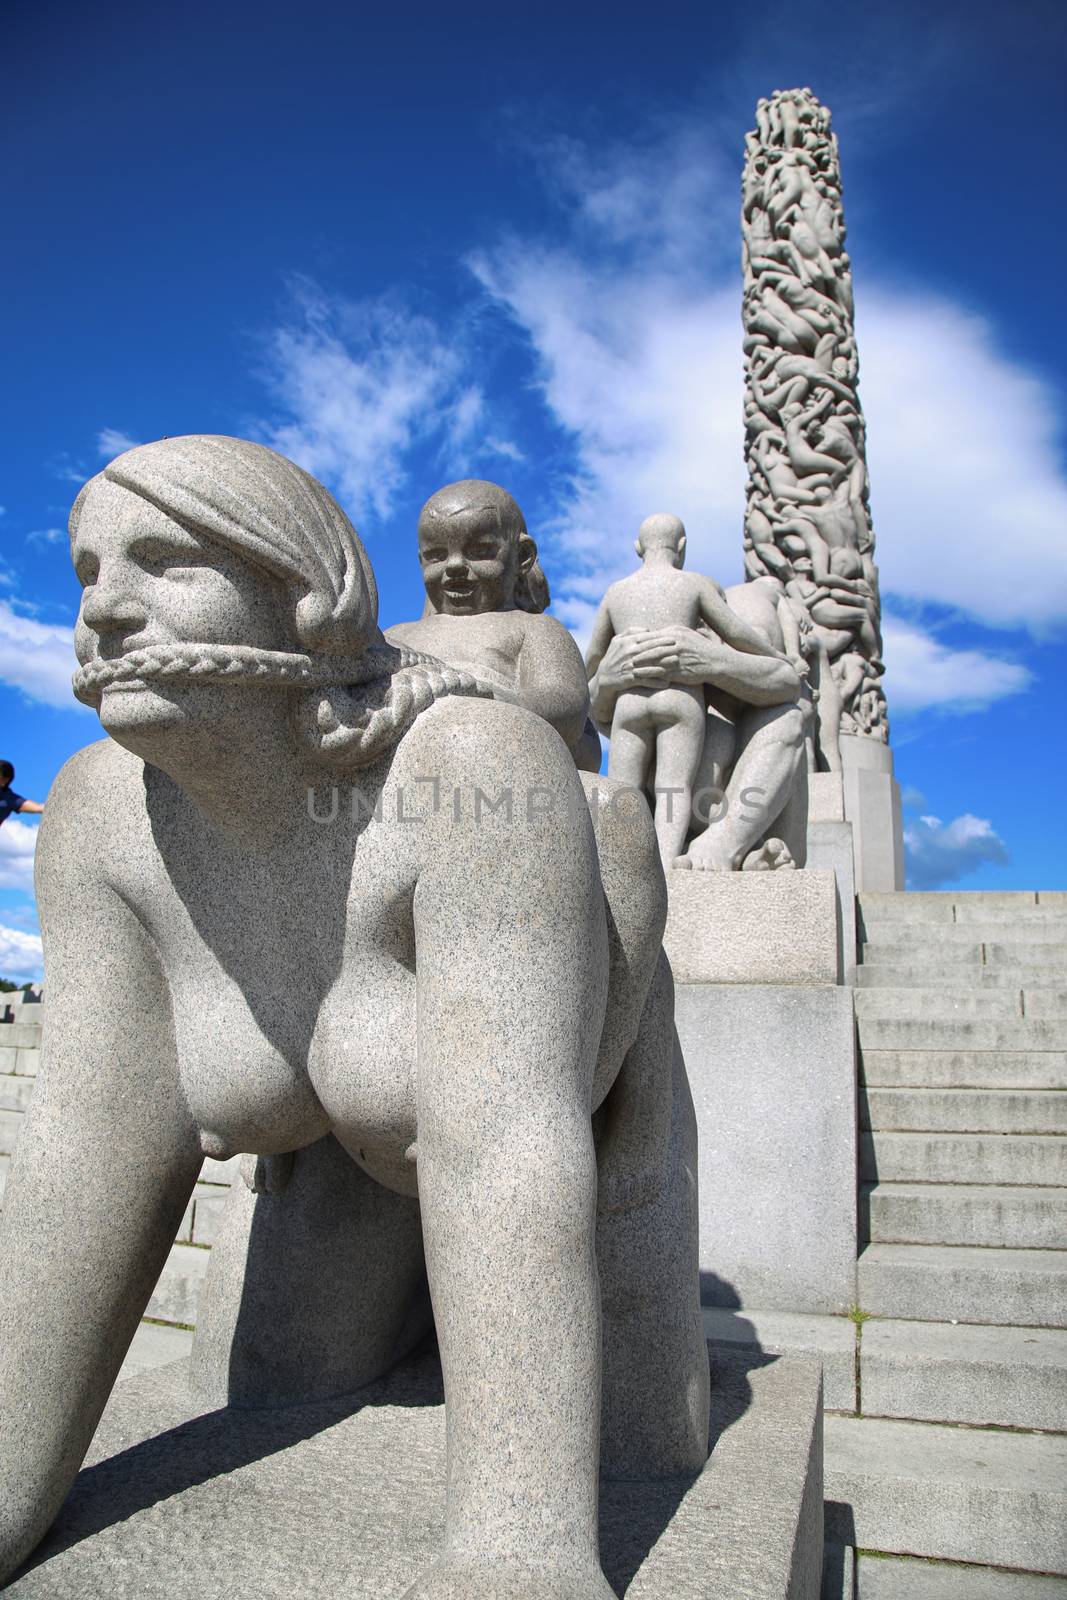 EDITORIAL OSLO, NORWAY - AUGUST 18, 2016: Sculptures at Vigeland by vladacanon